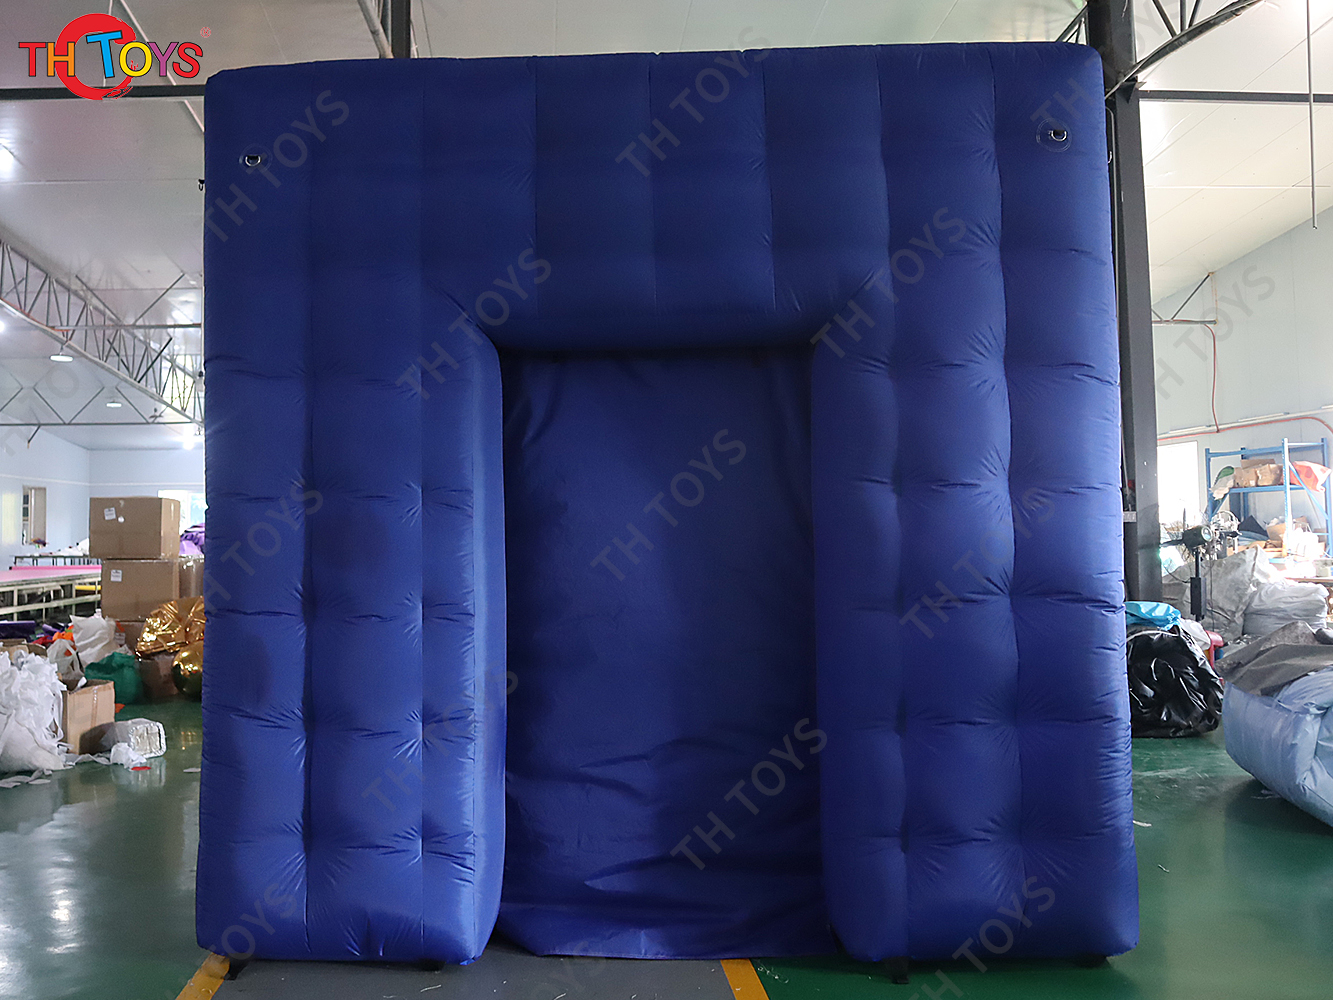 Free Shipping 3x3m Blue Inflatable Photo Booth Wedding Photo Shooting Tent with Colorful LED Lights